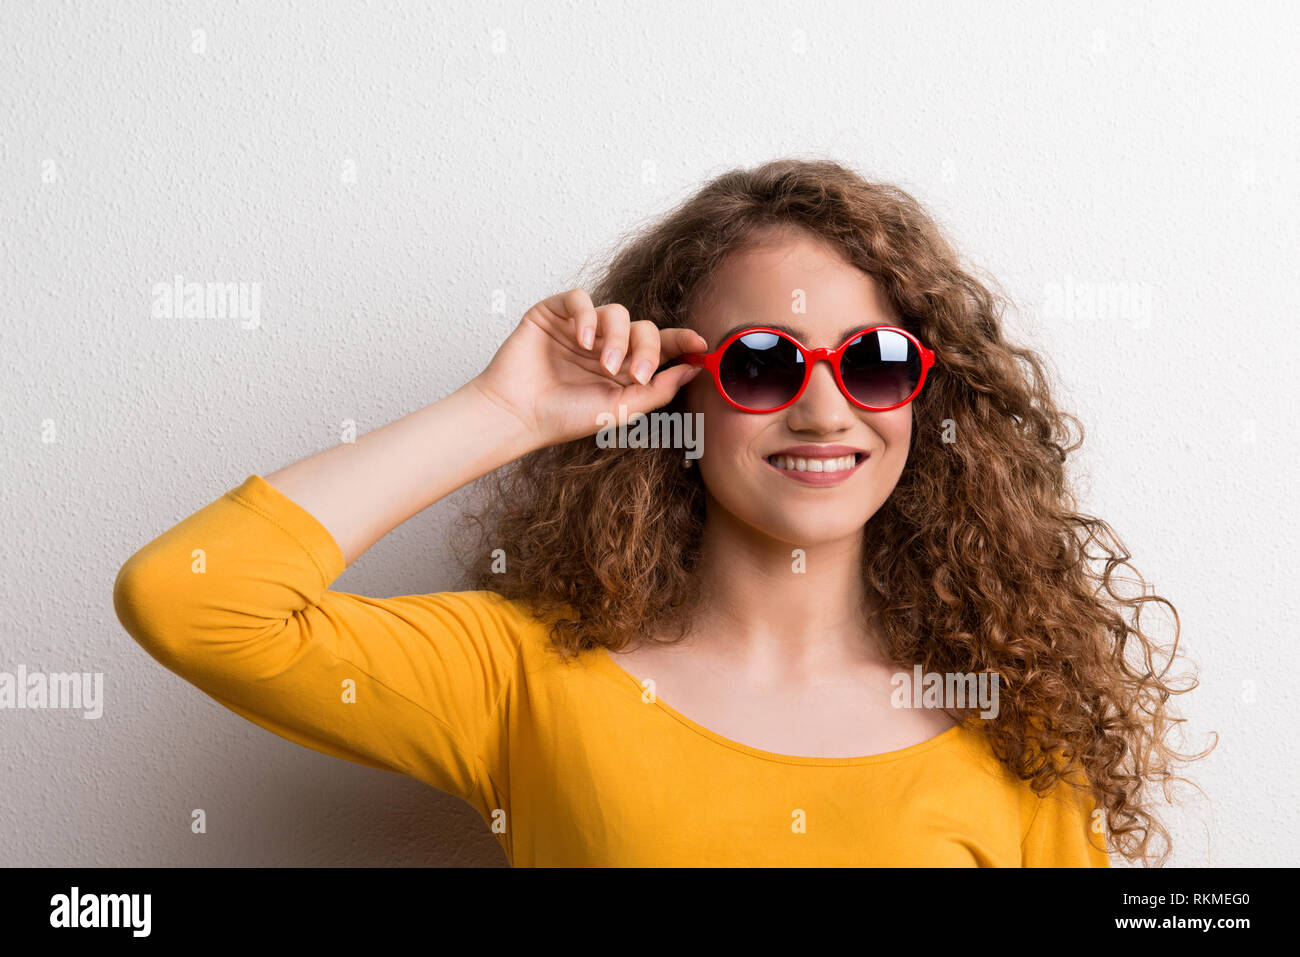 A young beautiful cheerful woman with red sunglasses in studio. Stock Photo